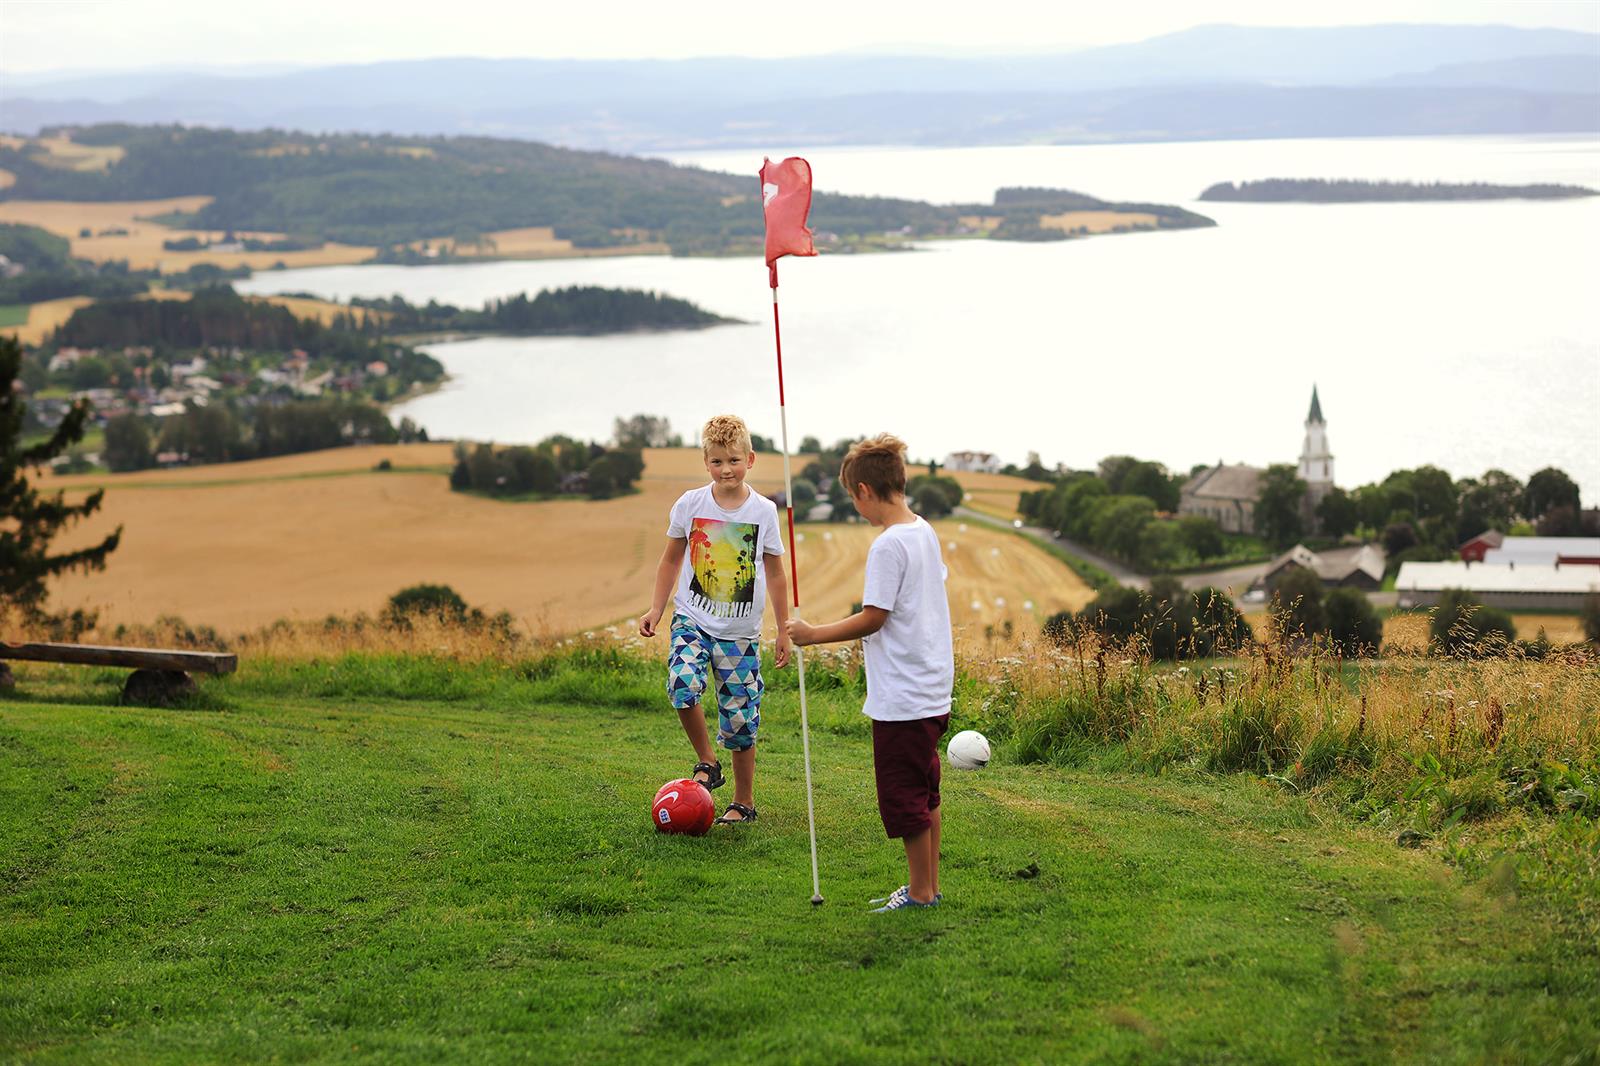 Fotball golf at Øyna - at the top of Inderøy